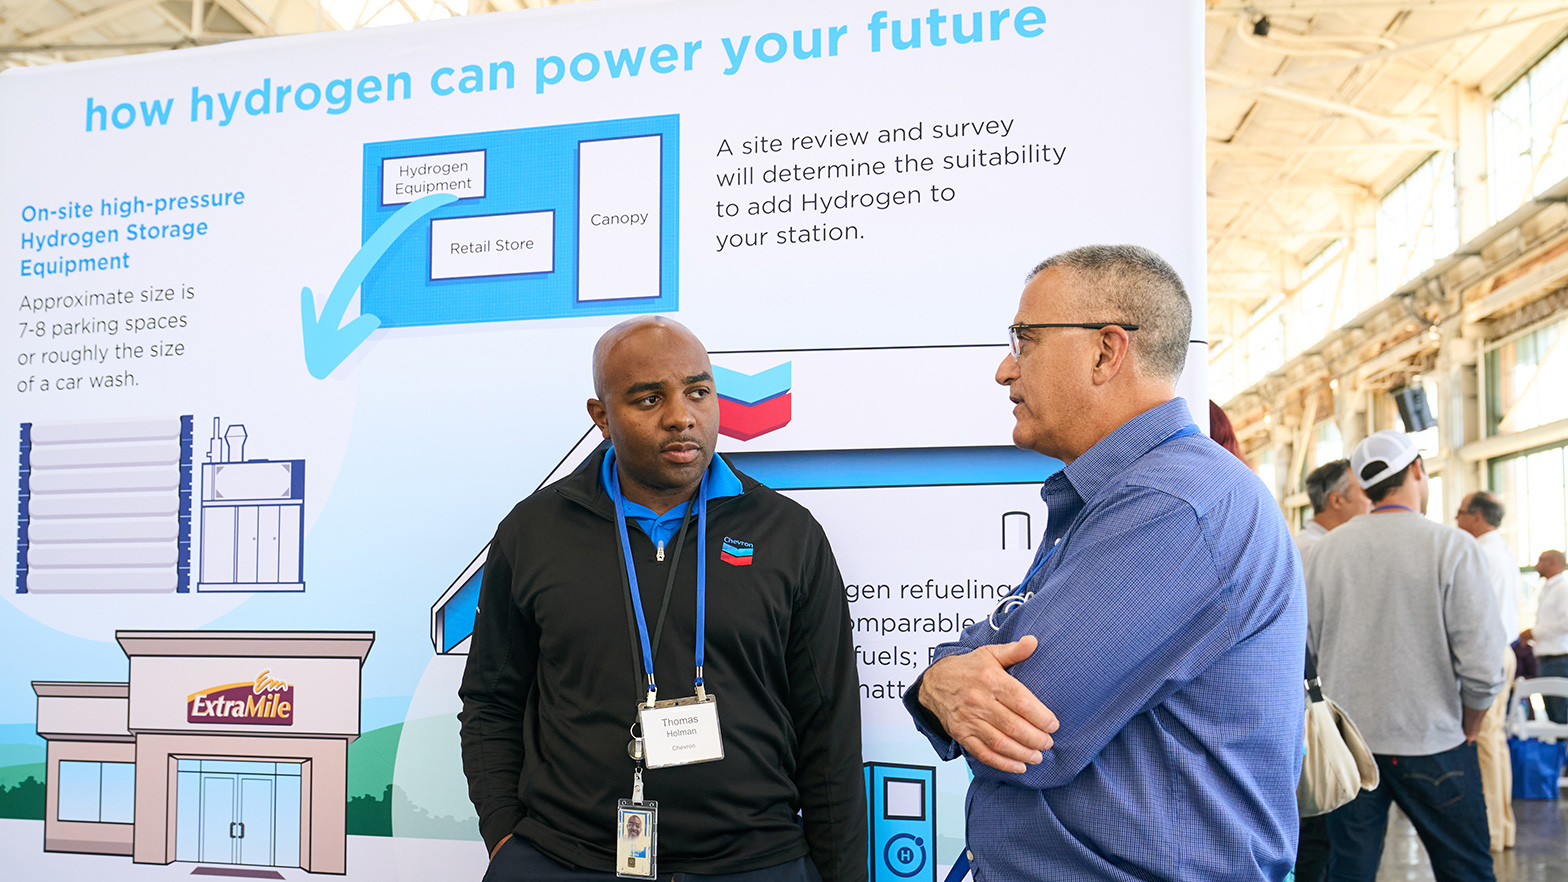 Chevron representatives offered details on hydrogen fueling station capabilities at the Road to Zero event.